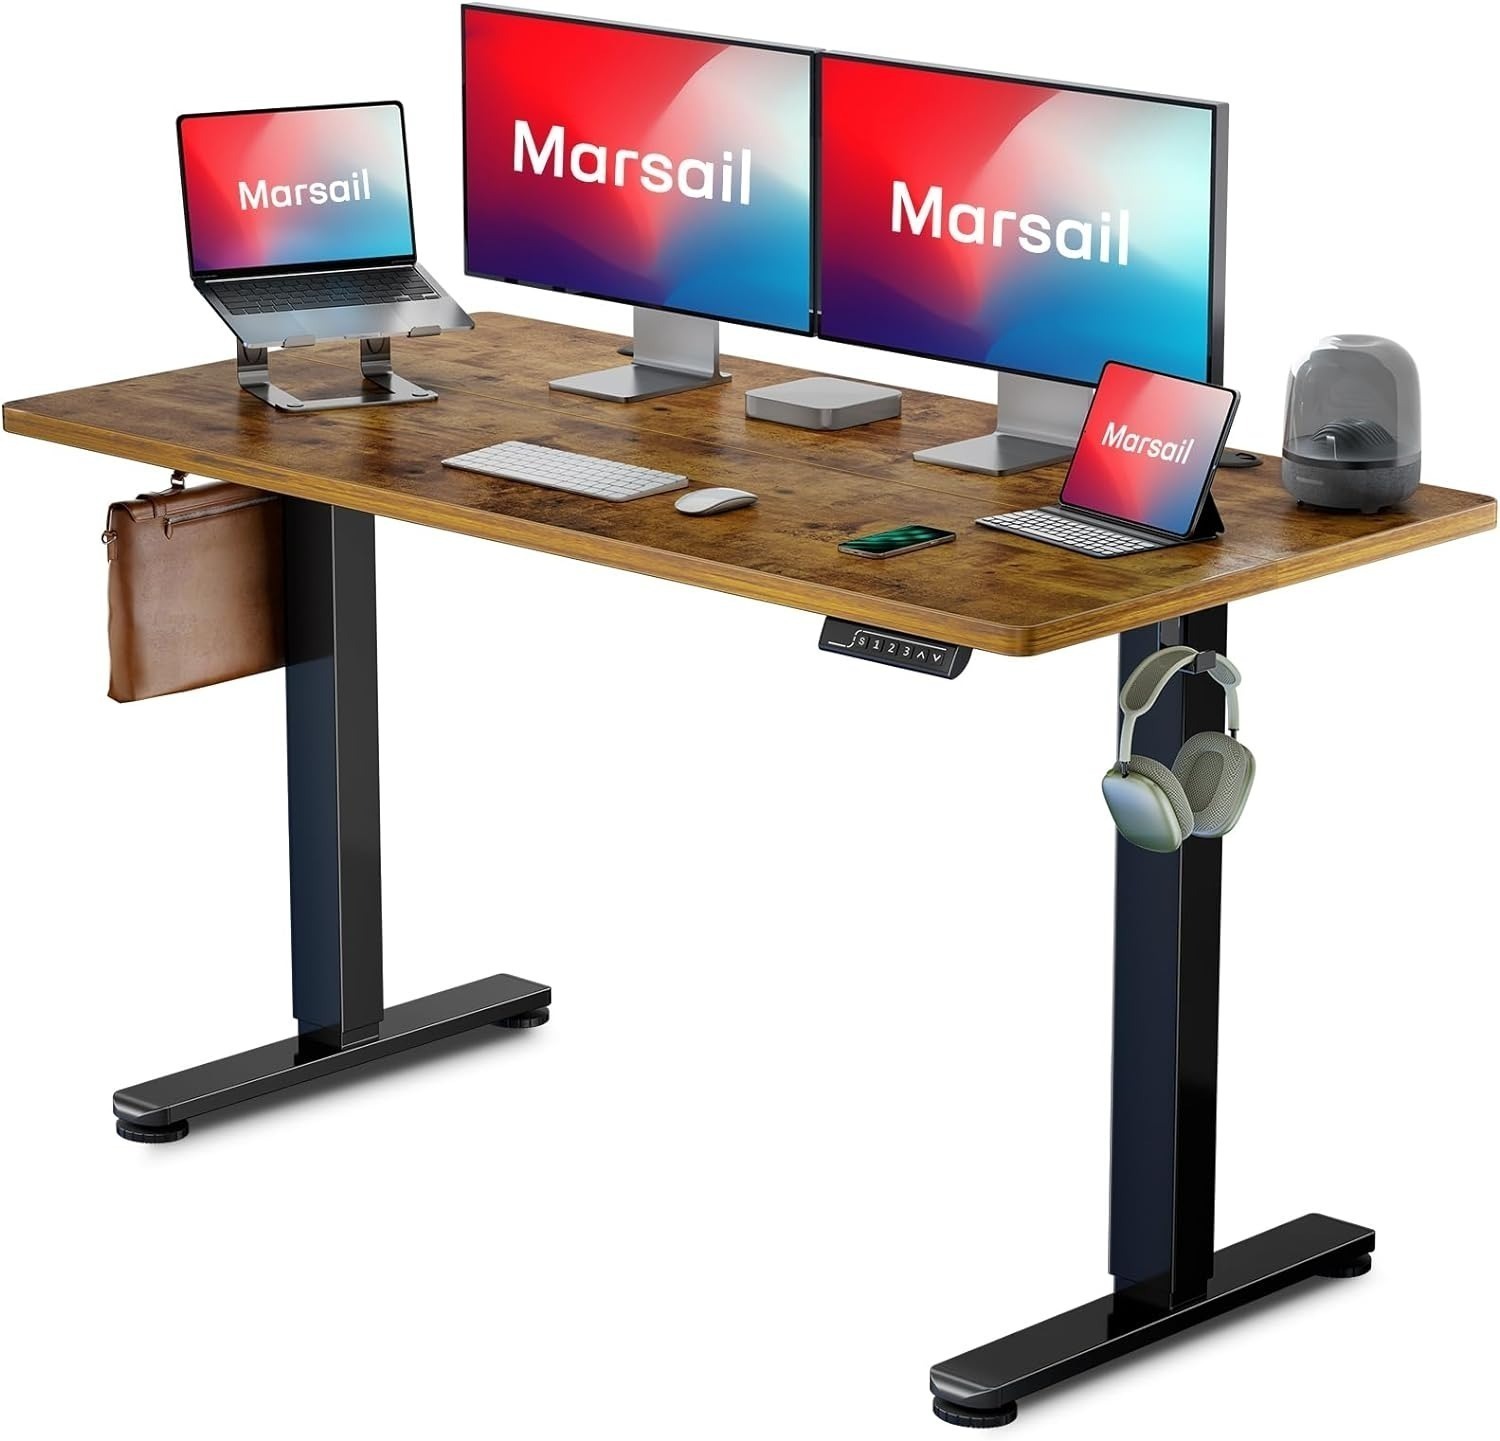 Marsail 55 x 24" Adjustable Height Electric Standing Desk $108.85, 48 x 24" Electric Standing Desk with Drawer (Black) $97.29 & More + Free Shipping